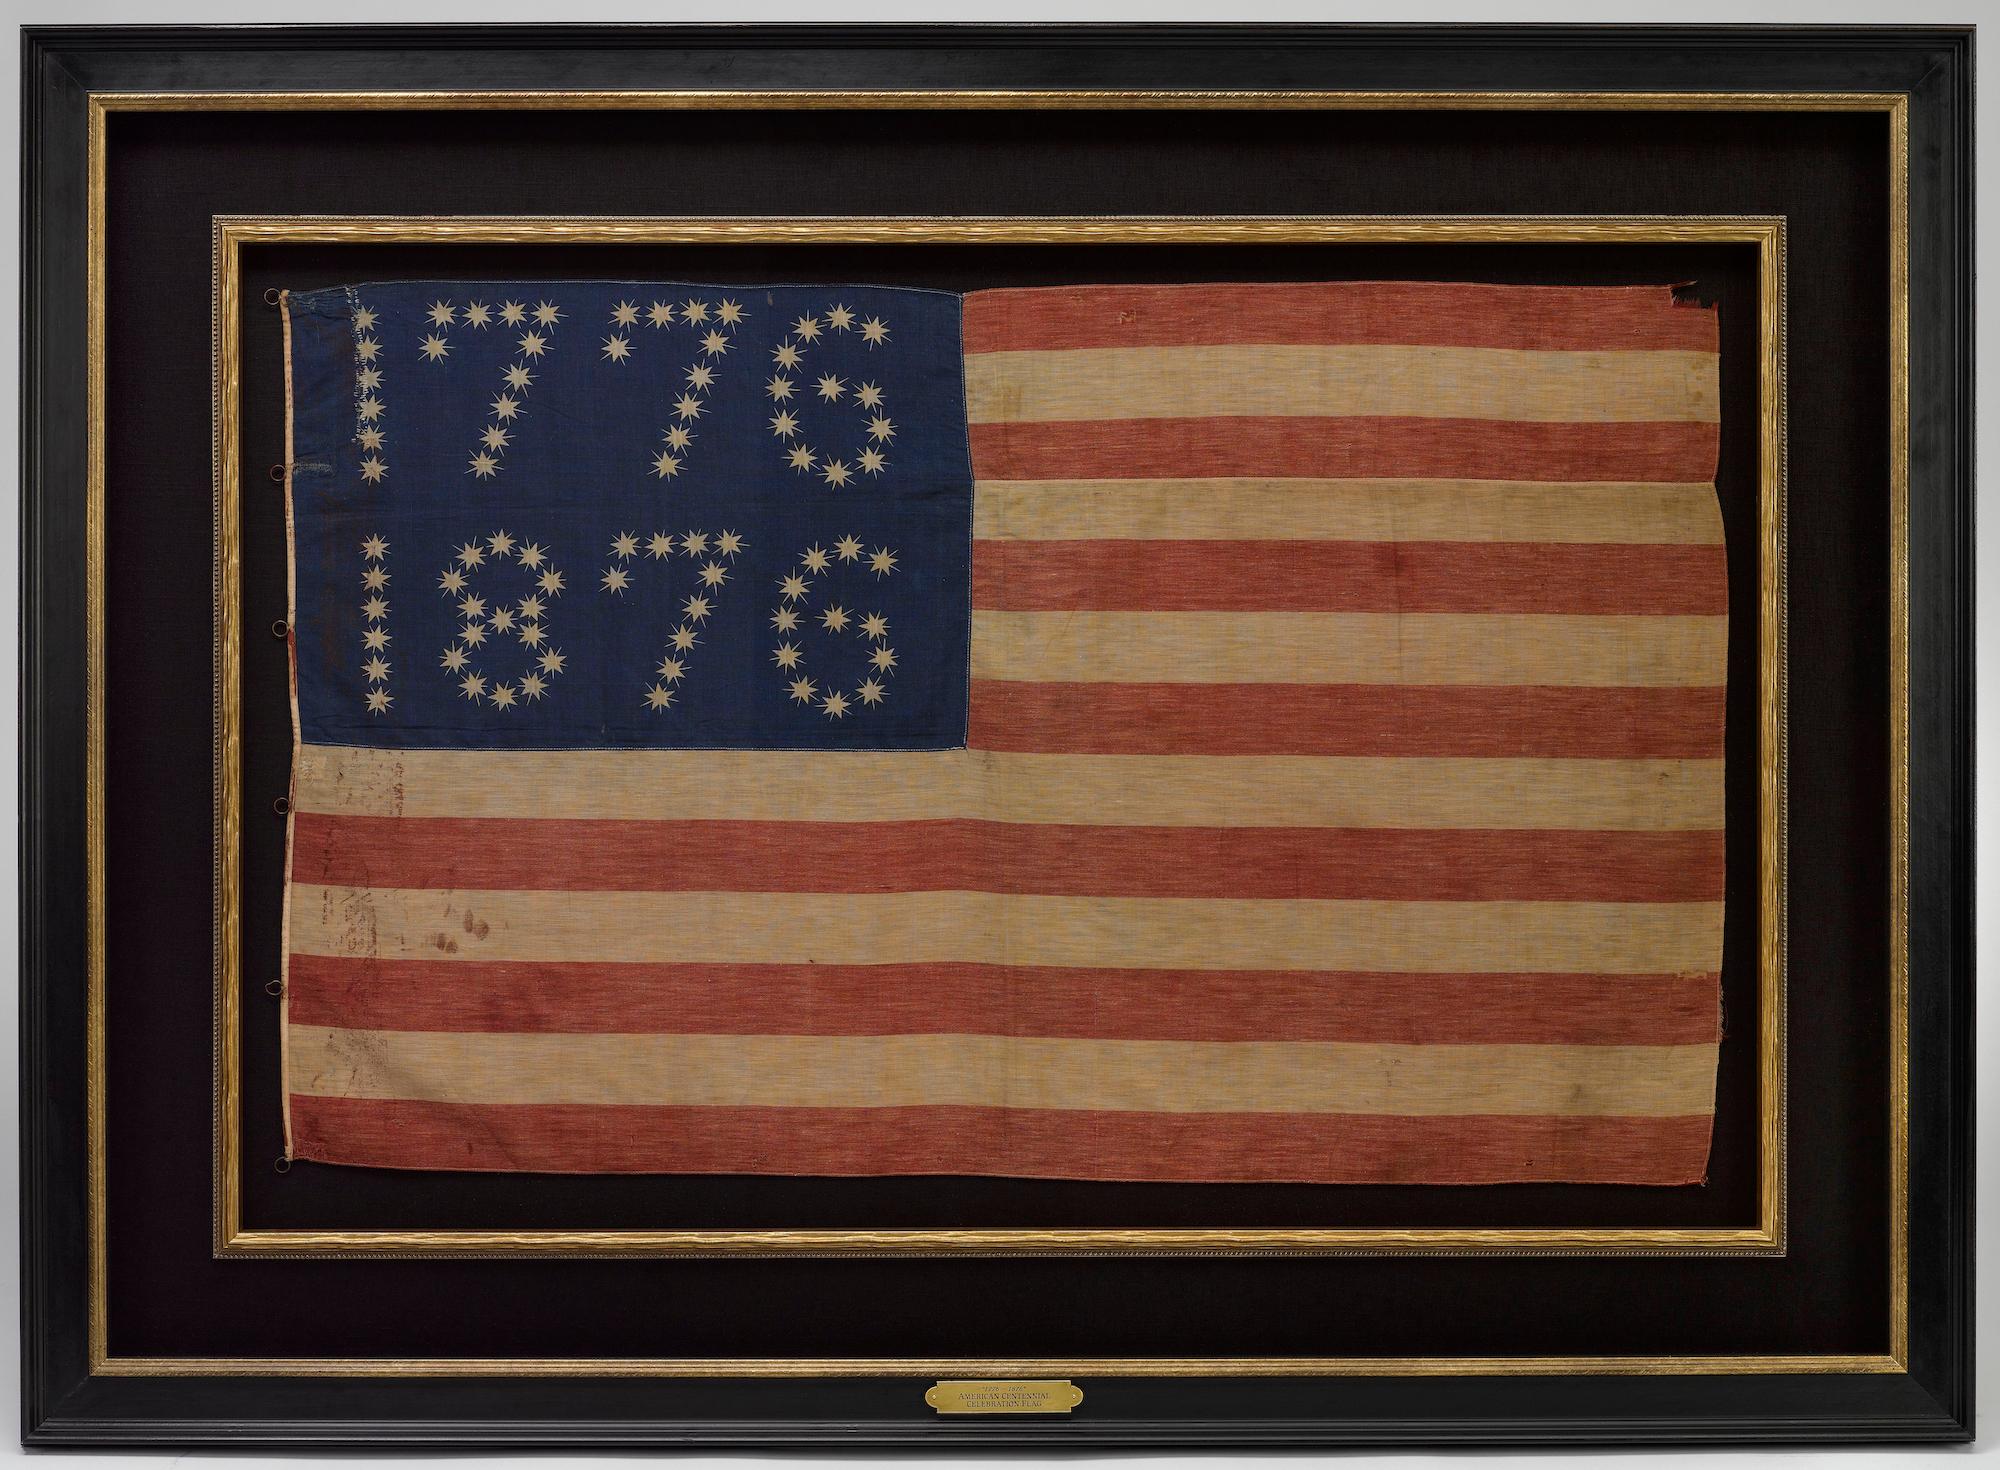 Presented is a rare Centennial patriotic flag banner, dating to 1876. The flag’s rich blue canton is spectacular, with 81 five-pointed, rayed stars printed in white and arranged to read “1776” and “1876.” The flag’s design is completed with thirteen